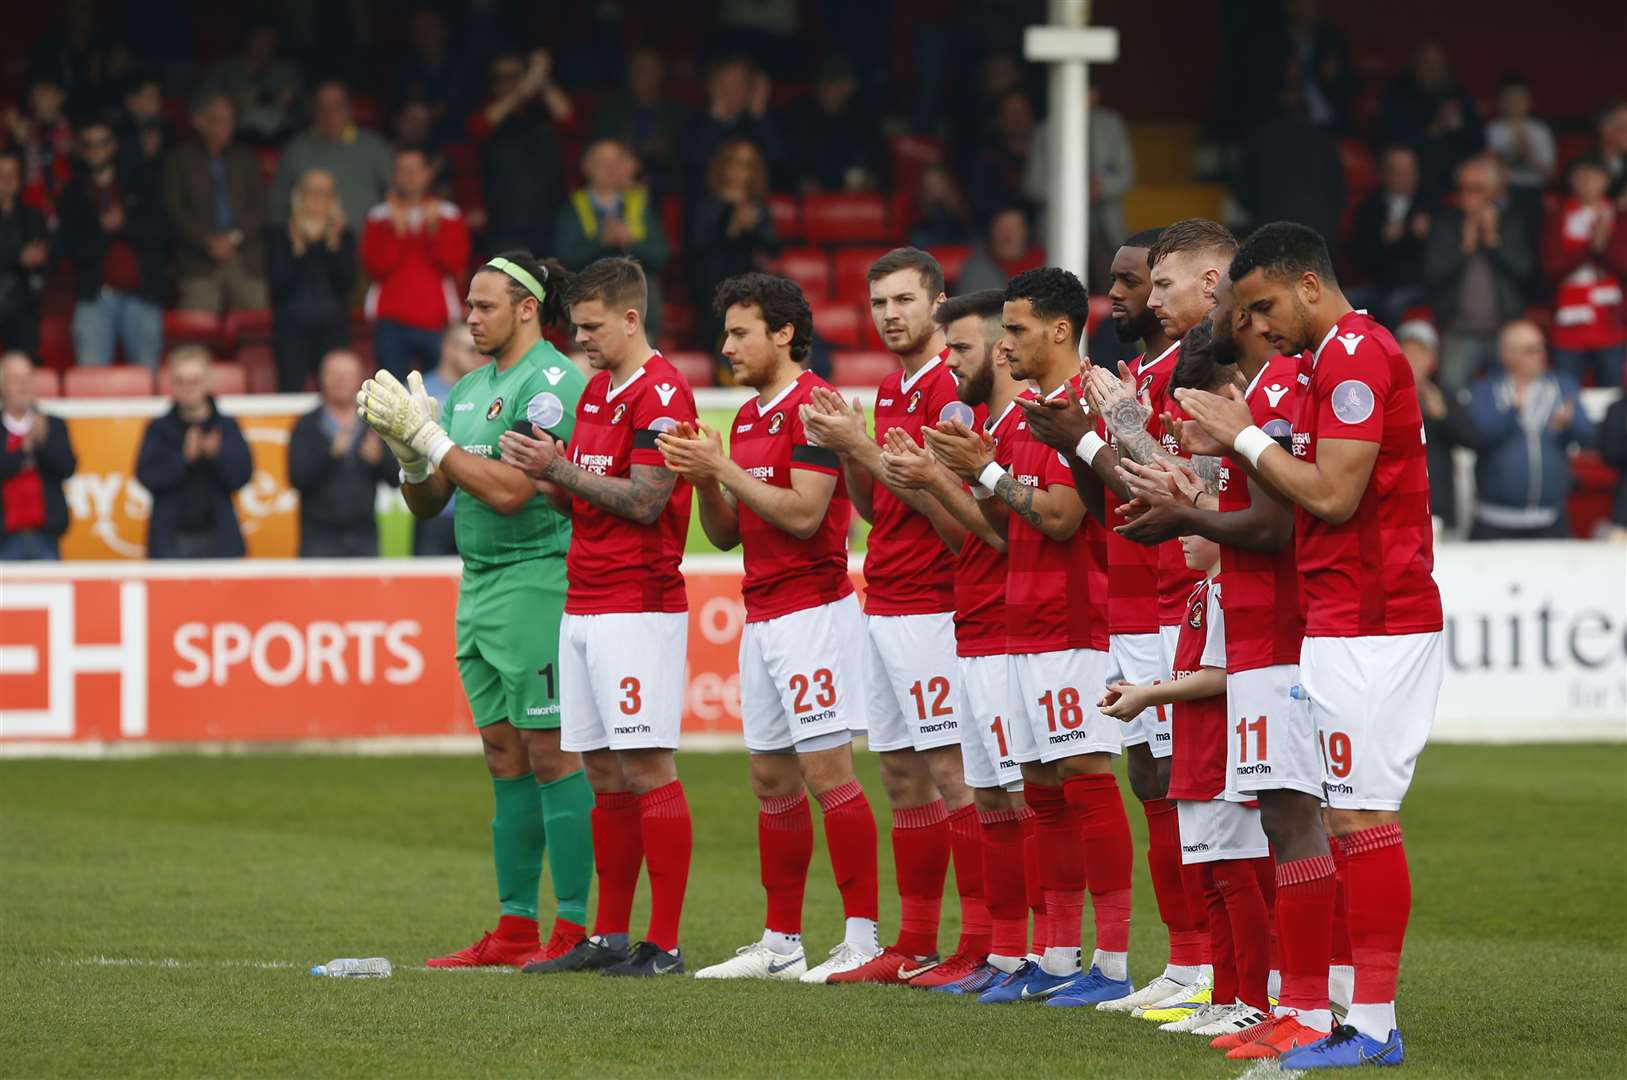 Ebbsfleet players say they have still not received last month's wages